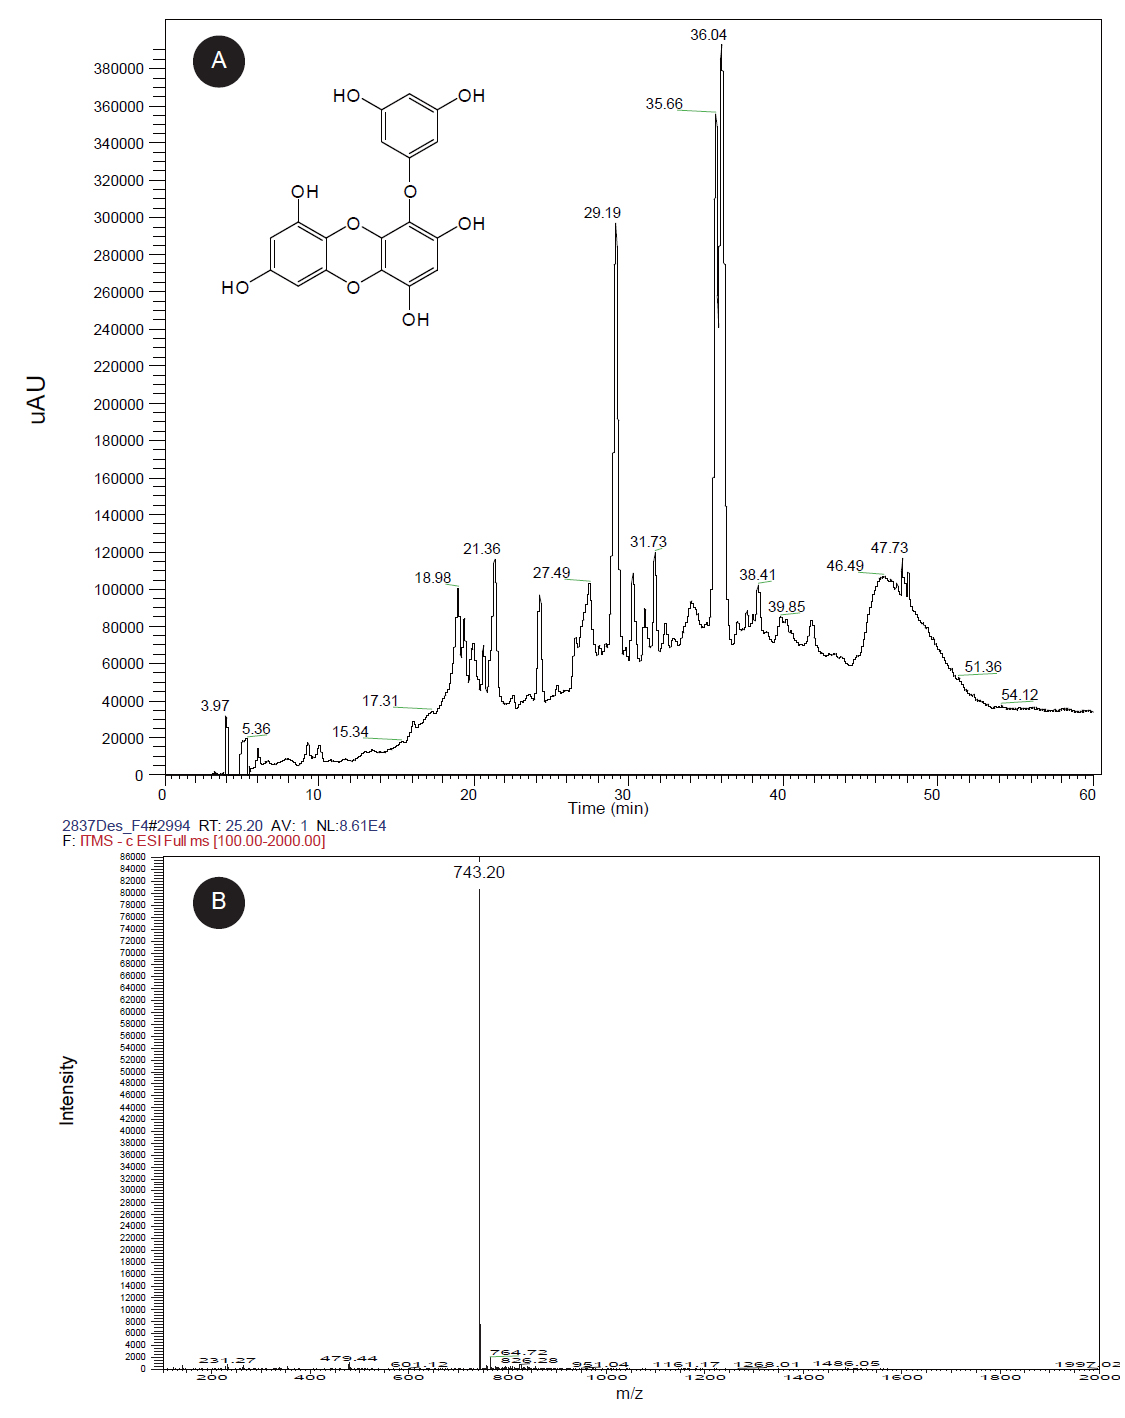 HPLC chromatogram (A) and ESI-MS spectra (B) of the 70% EtOH extracts from Ecklonia cava.